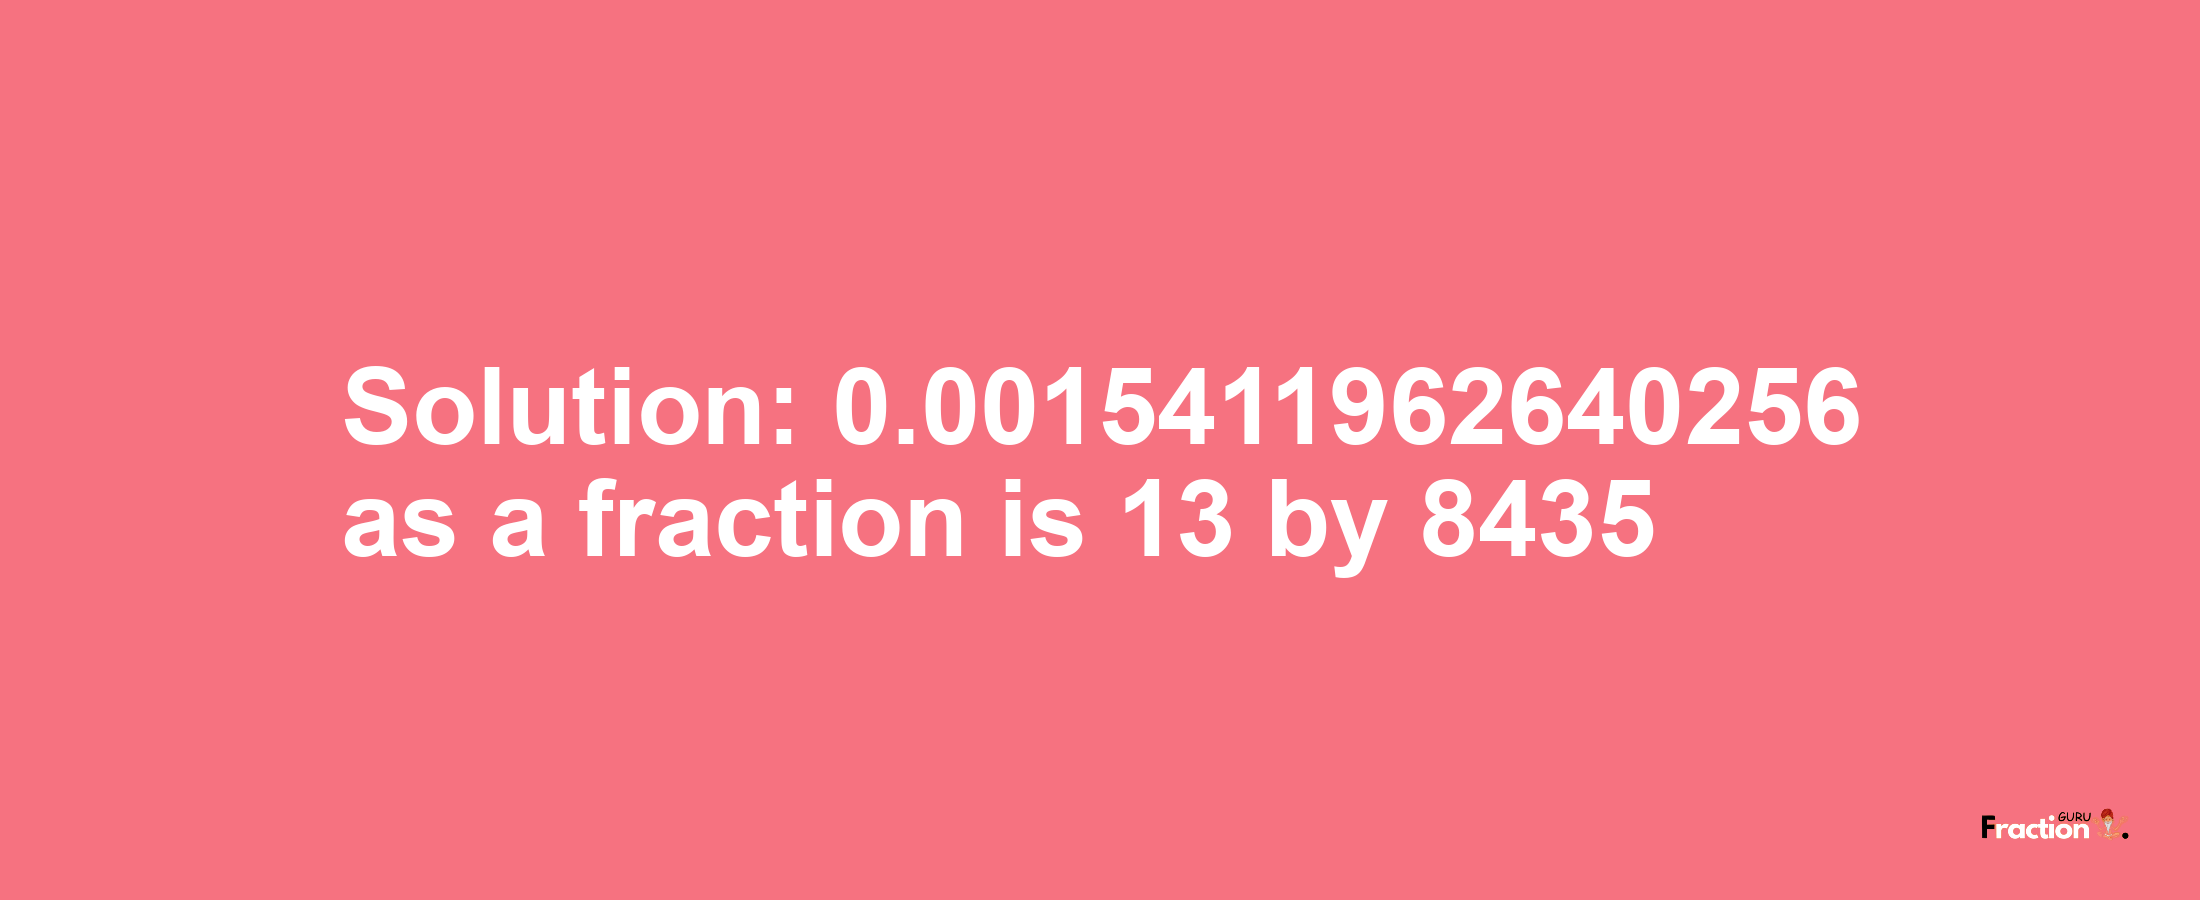 Solution:0.0015411962640256 as a fraction is 13/8435